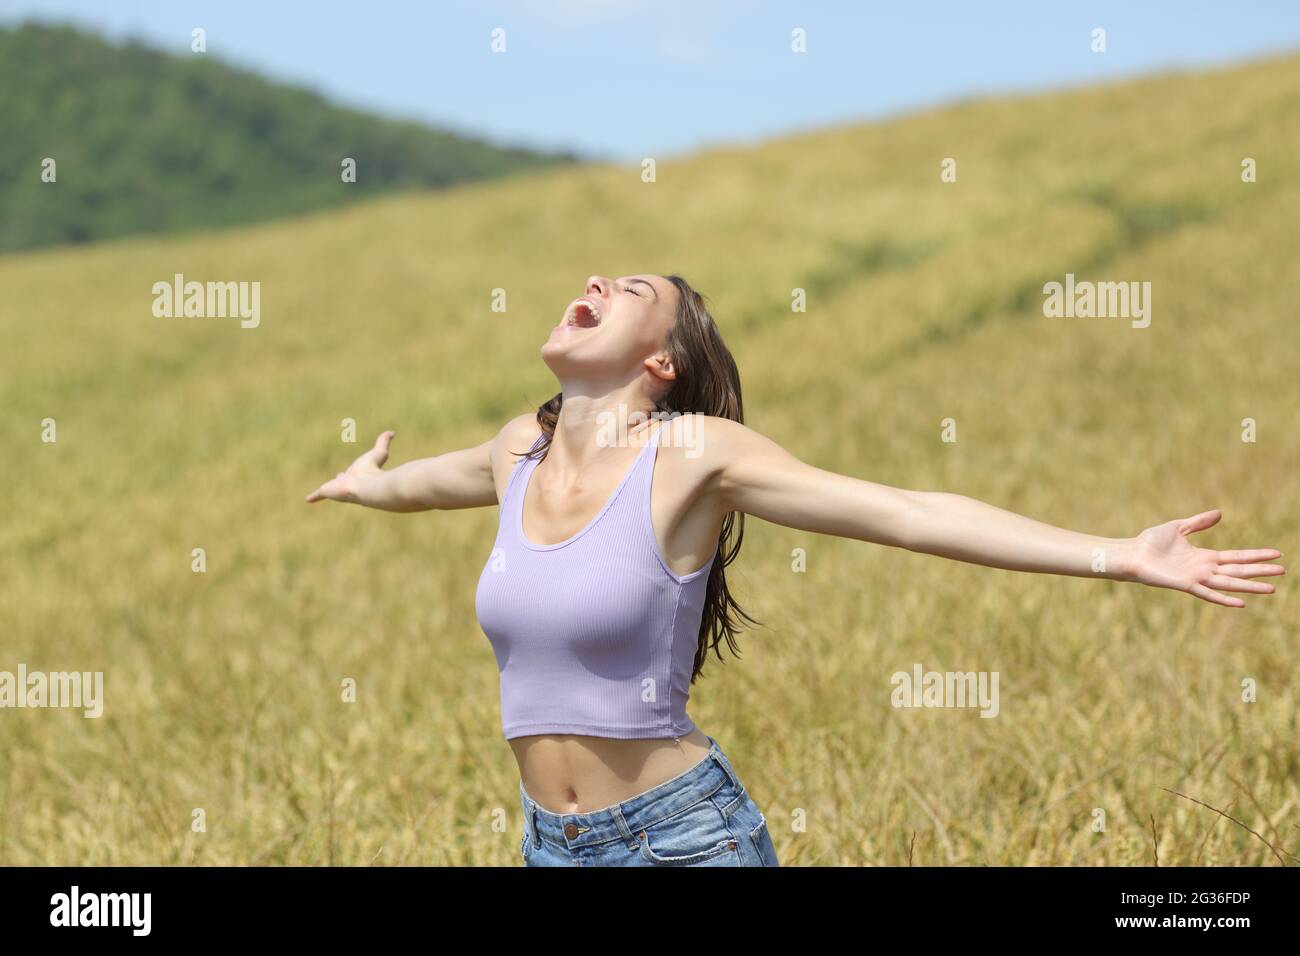 Excited woman screaming in a wheat field outstretching arms Stock Photo